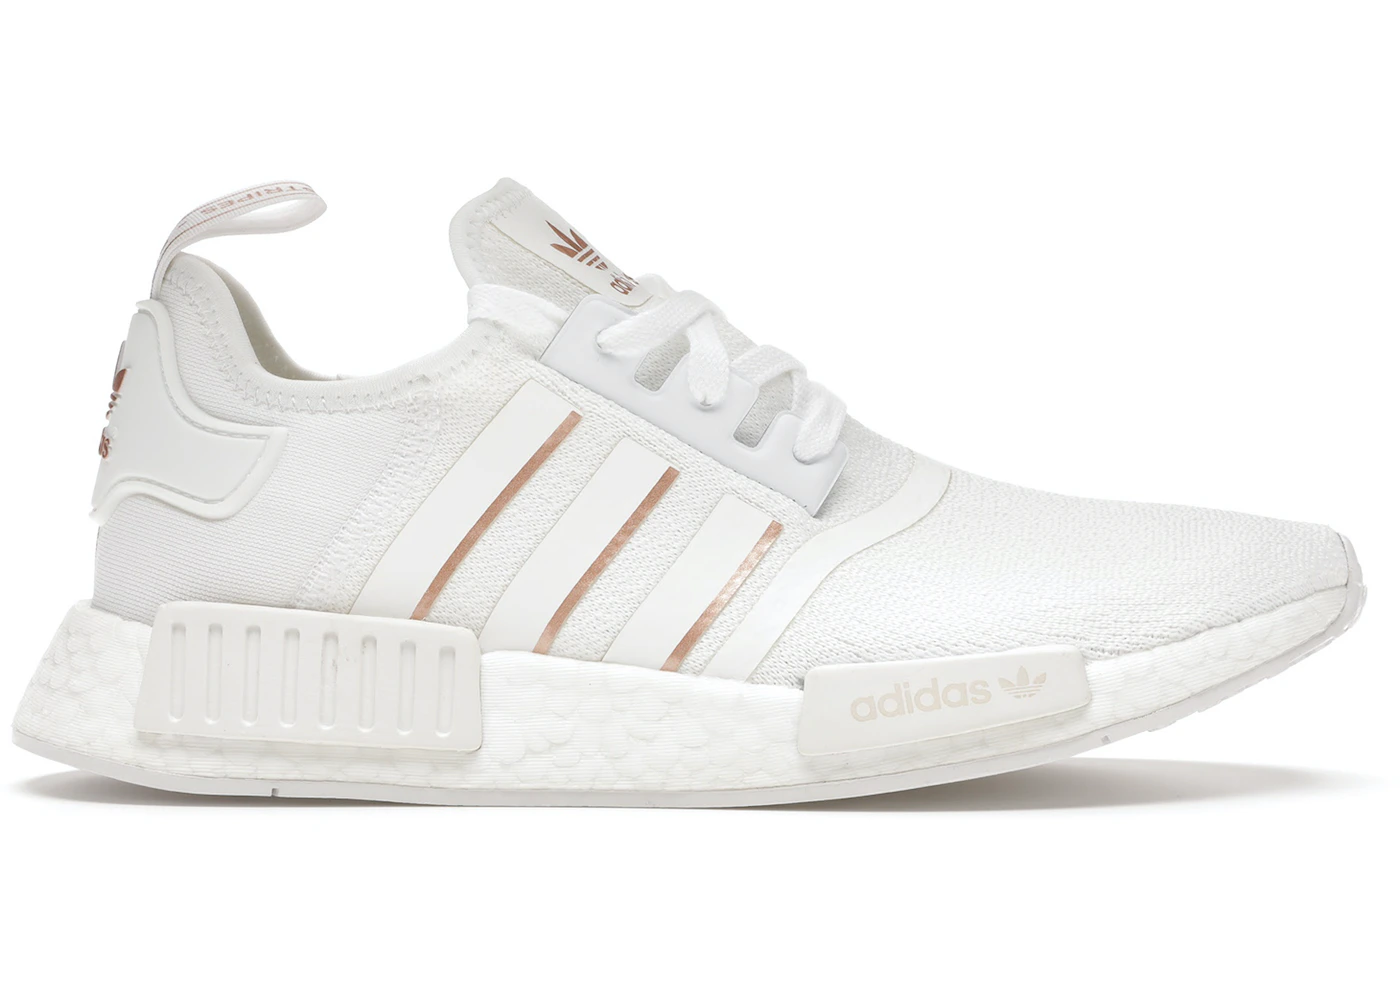 select license school adidas NMD_R1 Cloud White Rose Gold (W) - FW6434 - US